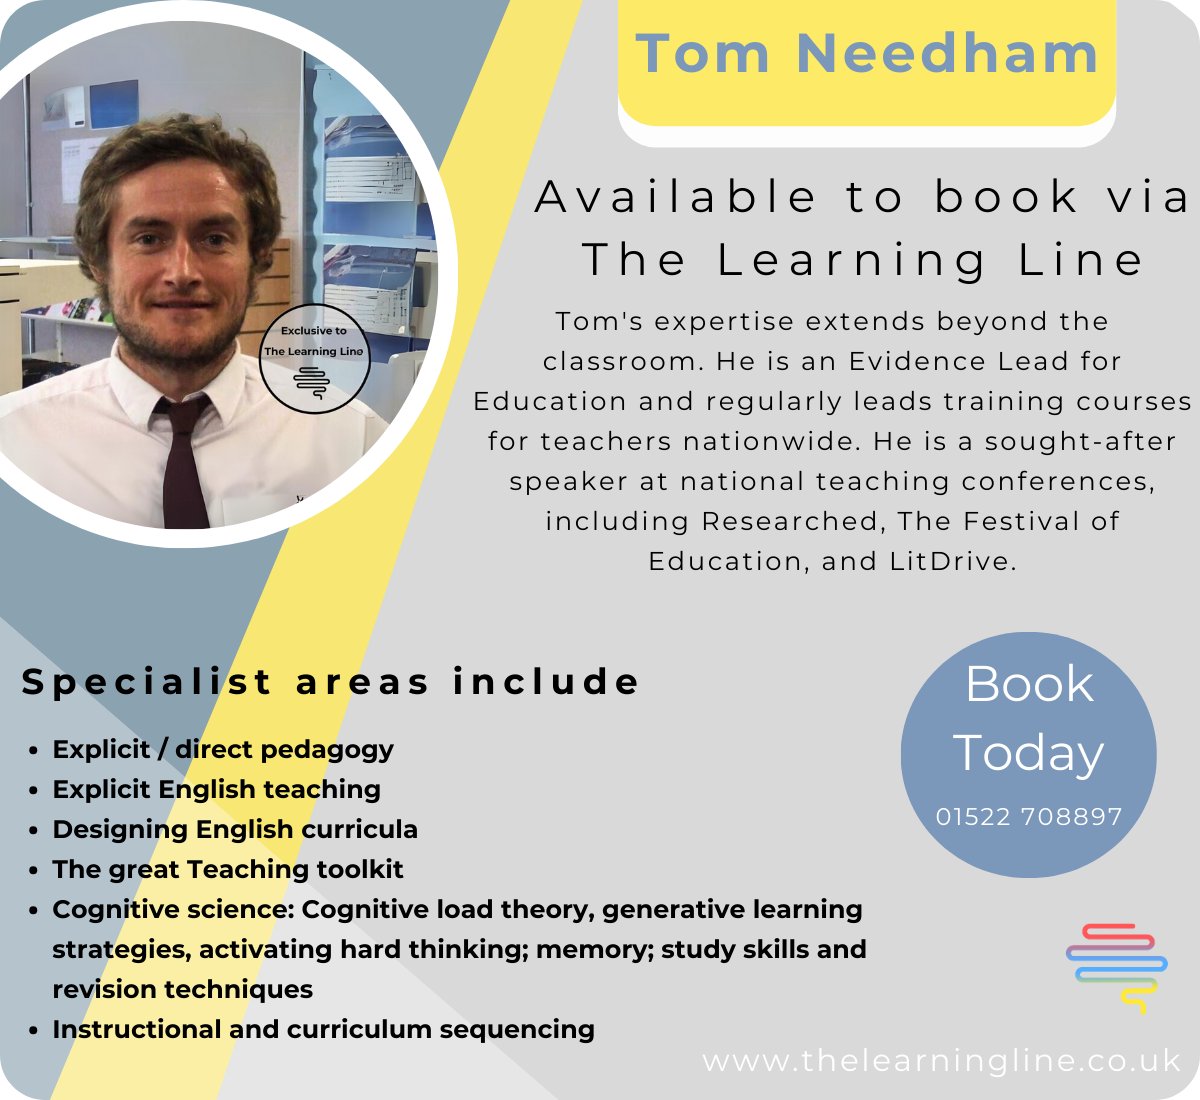 Tom Needham - Exclusively Available to book with The Learning Line.

Tom's experience includes organising highly rated CPD sessions for schools and multi-academy trusts, focusing on #curriculum planning, #pedagogy for English, #cognitivescience, and explicit/direct instruction.